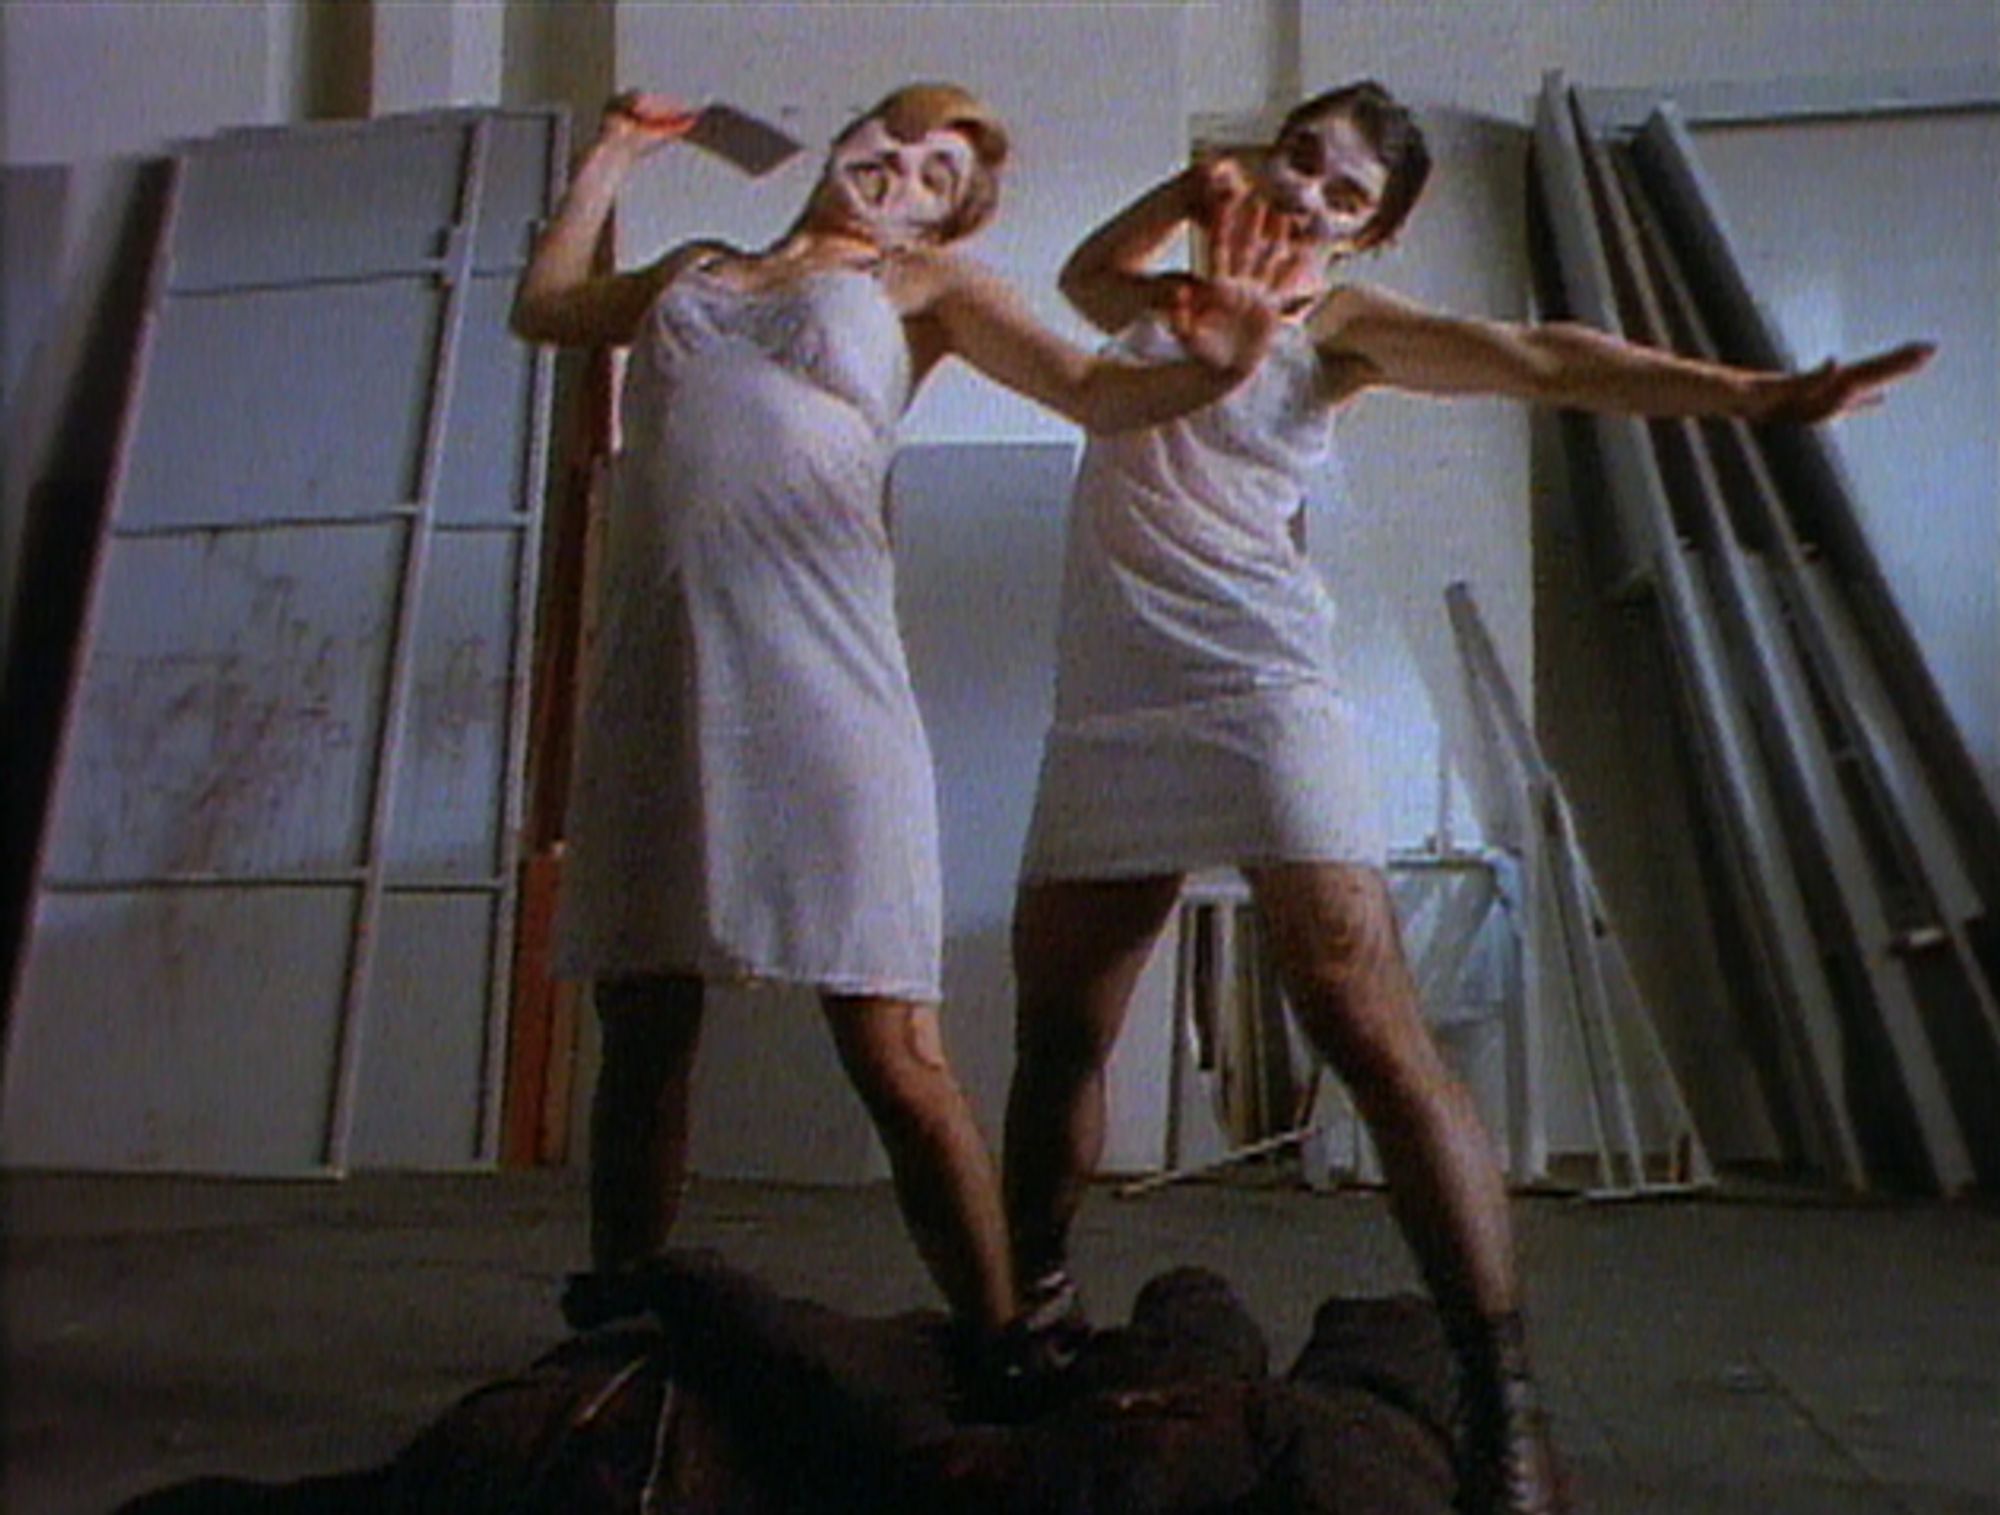 Two people wearing white dresses hold up a cleaver manically, ready to use it.